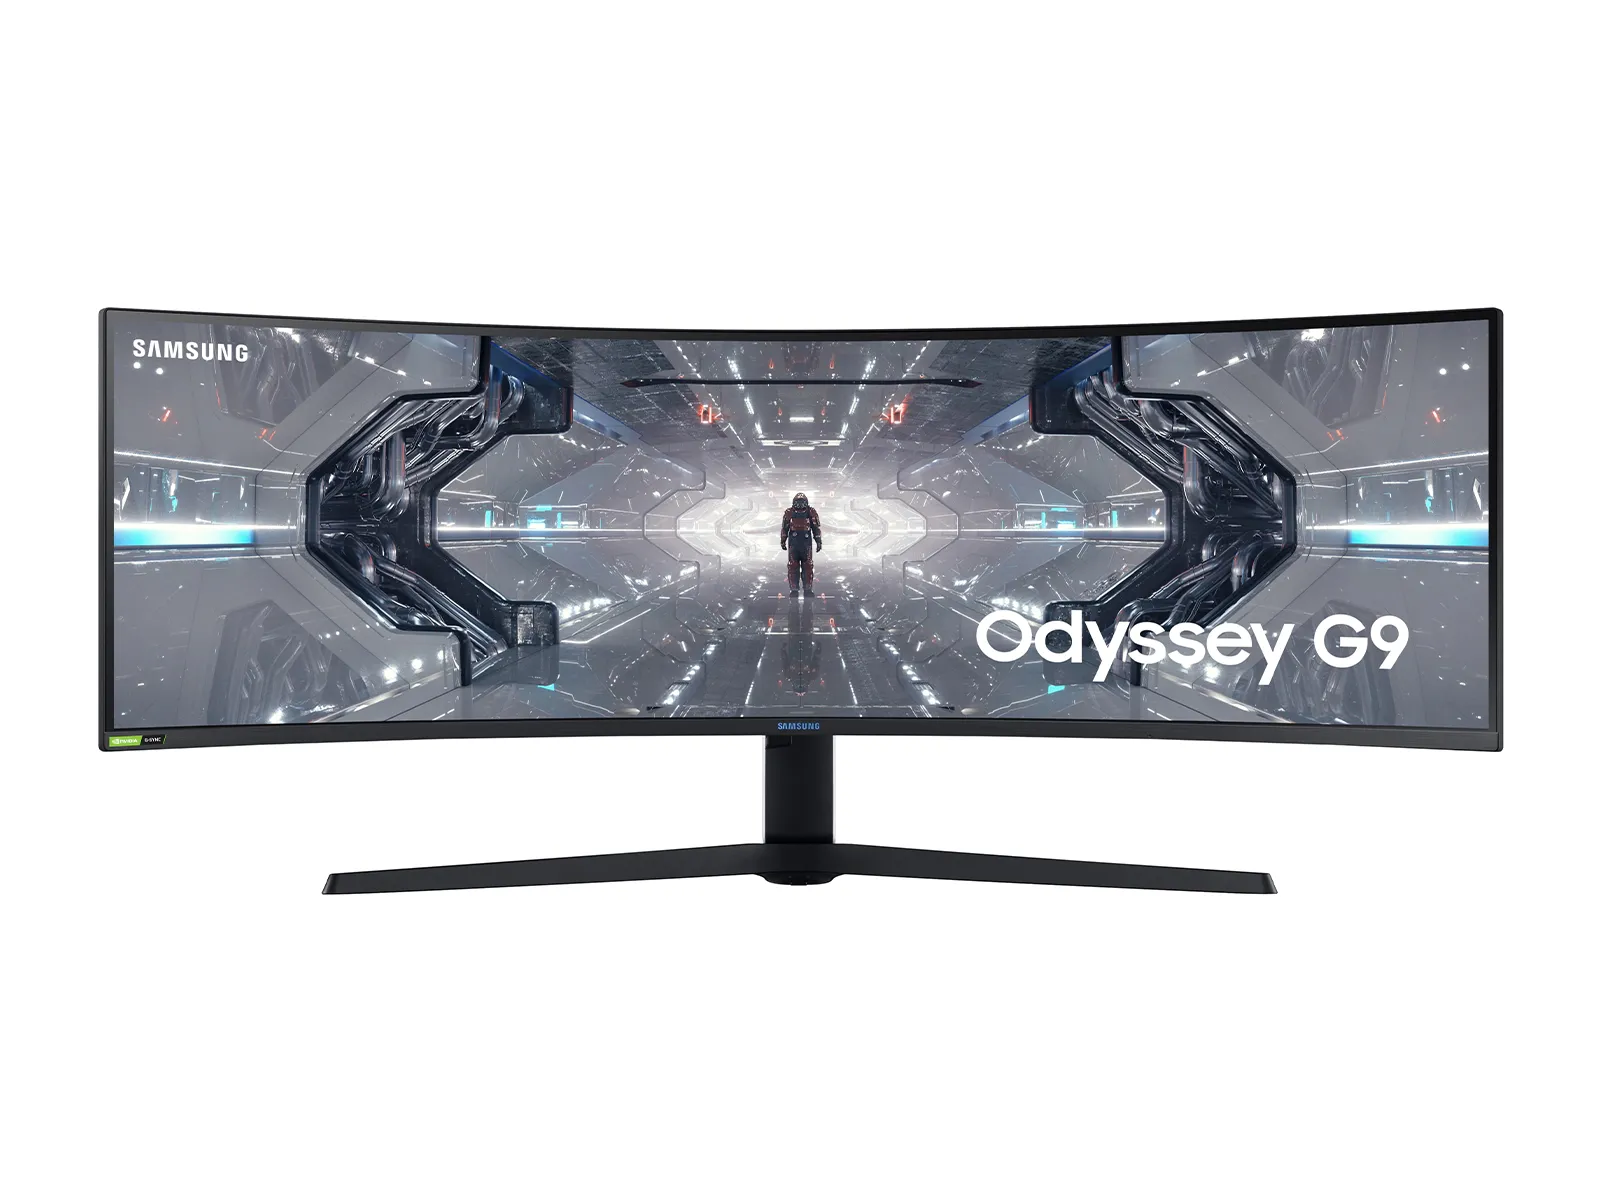 The Samsung Odyssey is an incredible gaming monitor that's as big as two screens side-by-side.  It has ultrawide Quad HD resolution, a 240Hz refresh rate, and HDR 1000 support.